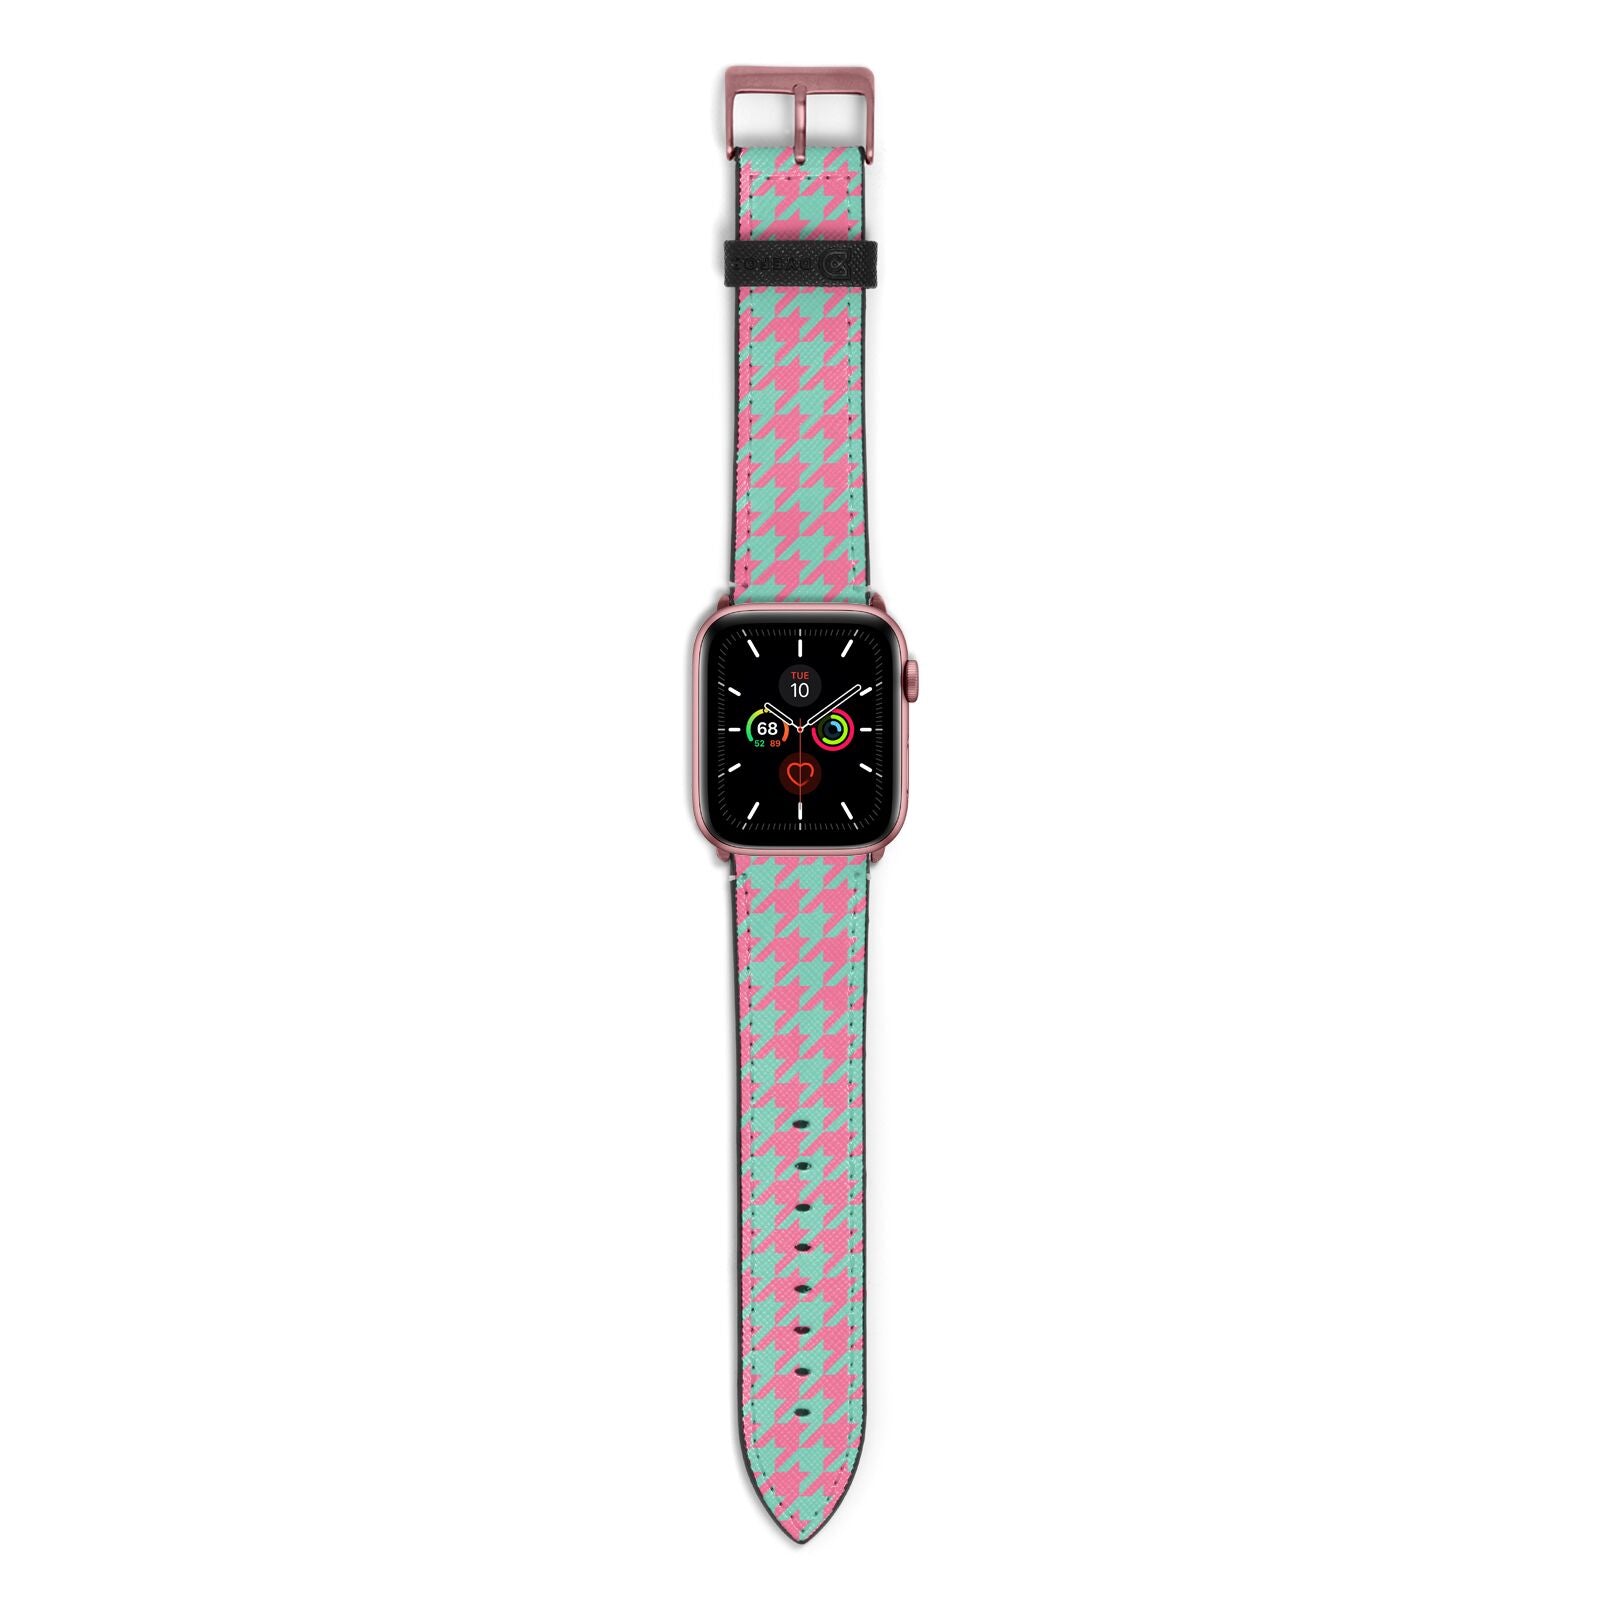 Pink Houndstooth Apple Watch Strap with Rose Gold Hardware